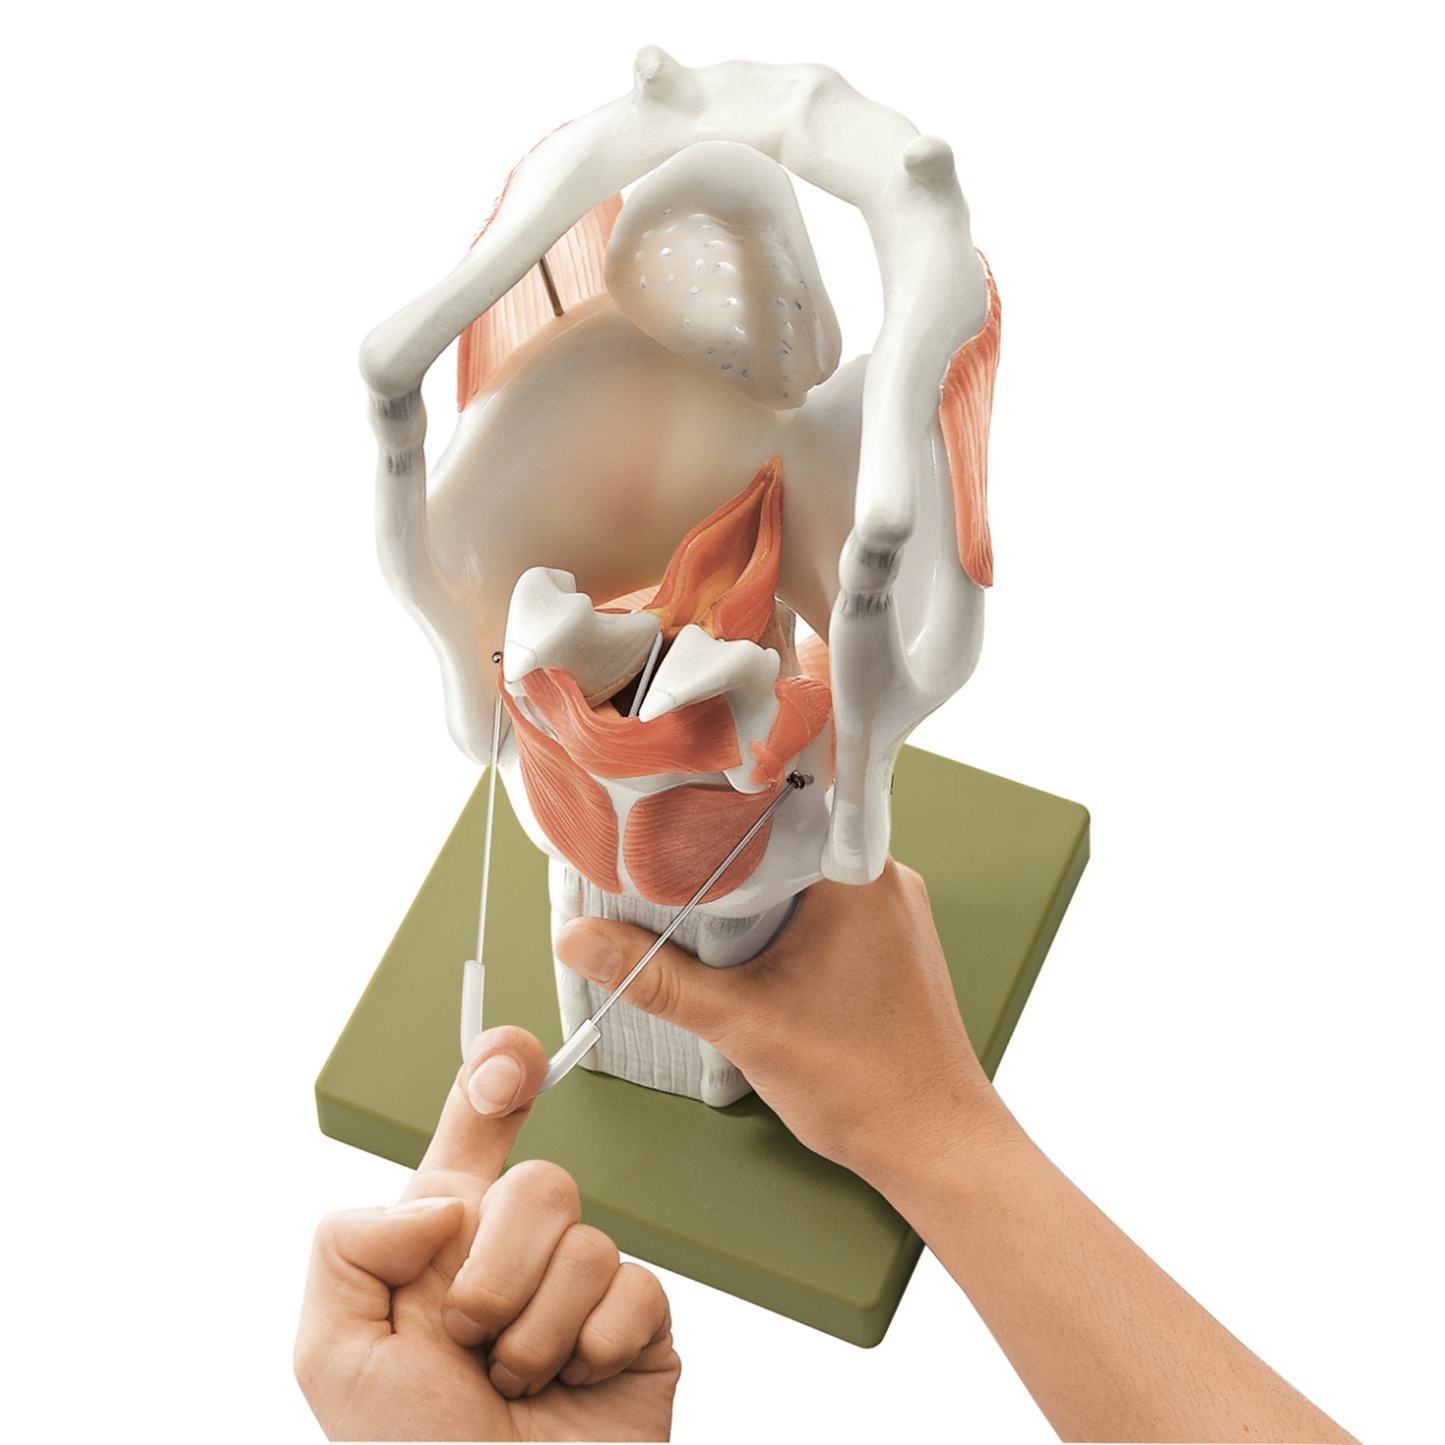 Enlarged and particularly movable larynx model with vocal folds and relationships to several other tissues